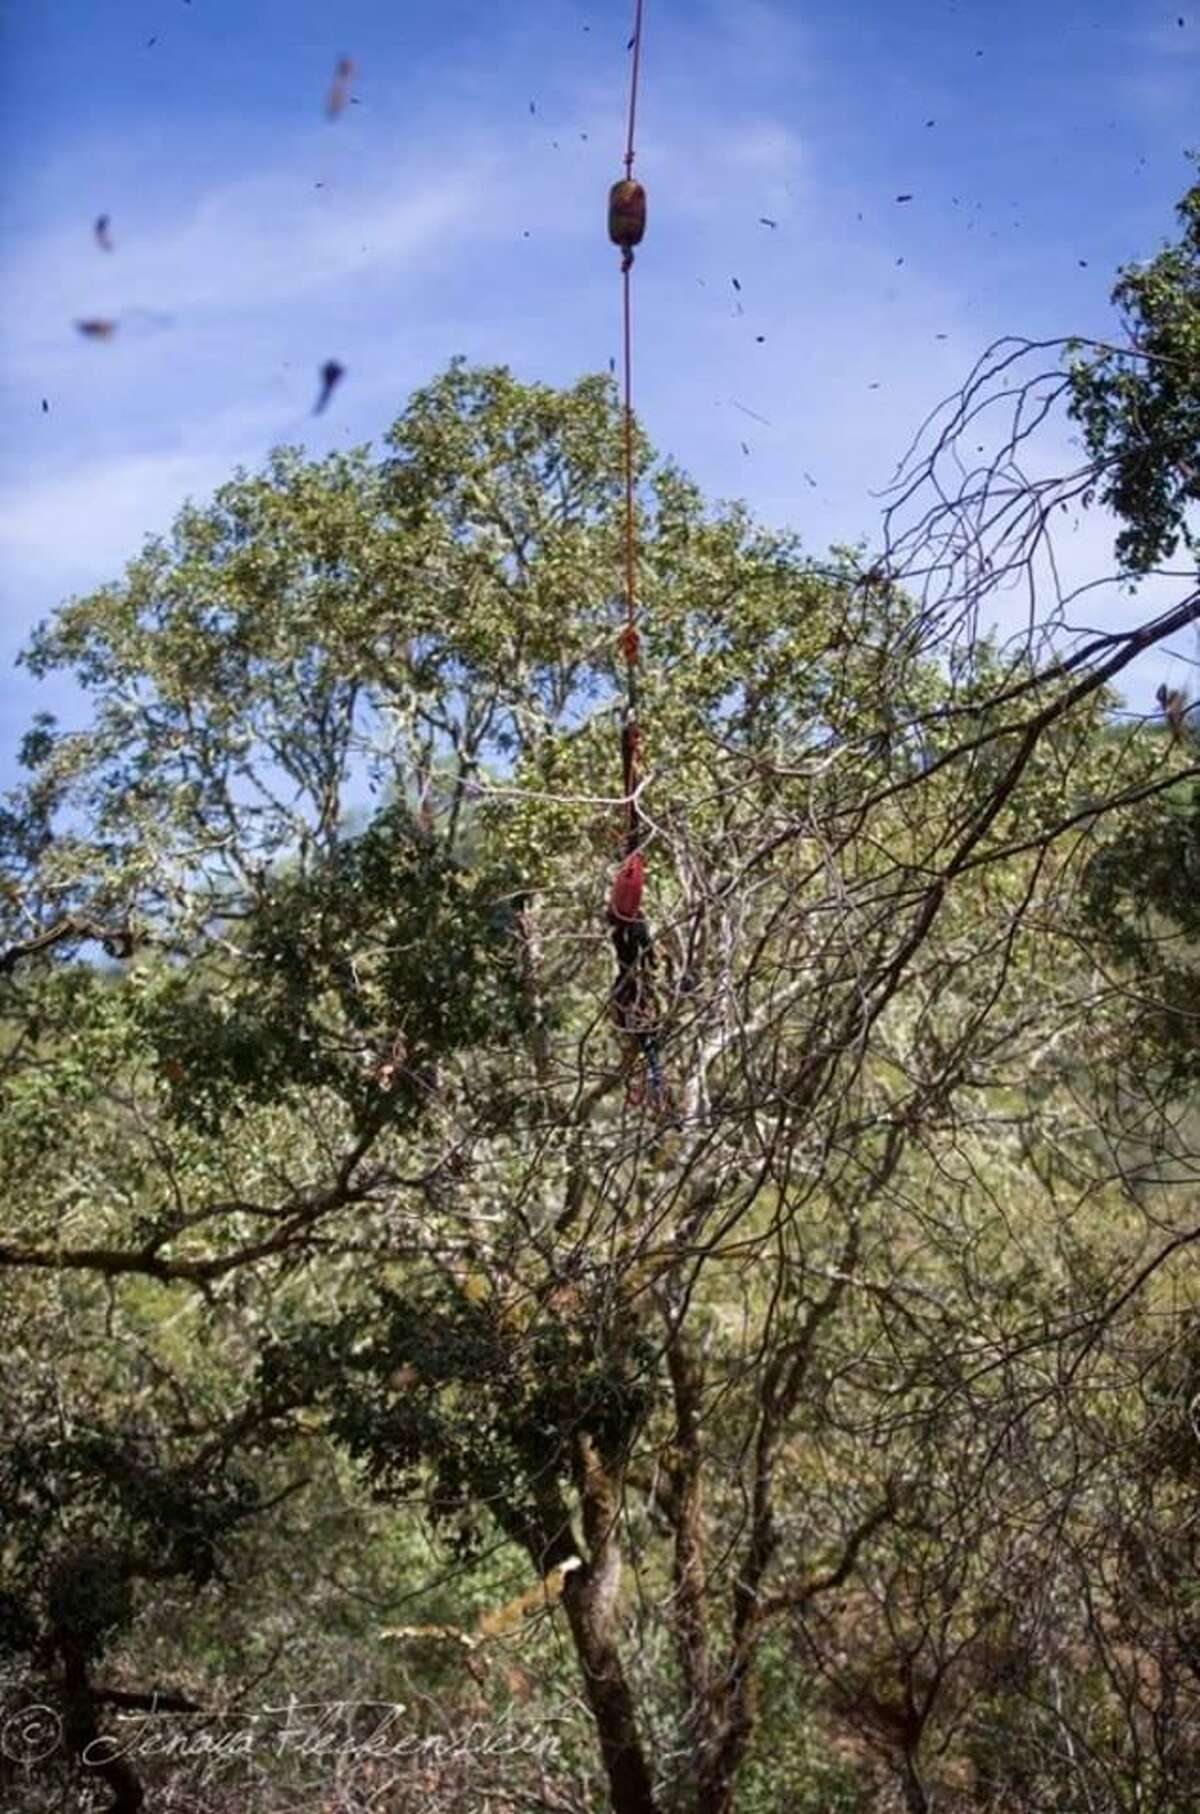 A helicopter crew from the Sonoma County Sheriff’s Office was called on Sunday to rescue an injured 71-year-old man who fell down a 200-foot ravine near Healdsburg while hunting pigs.